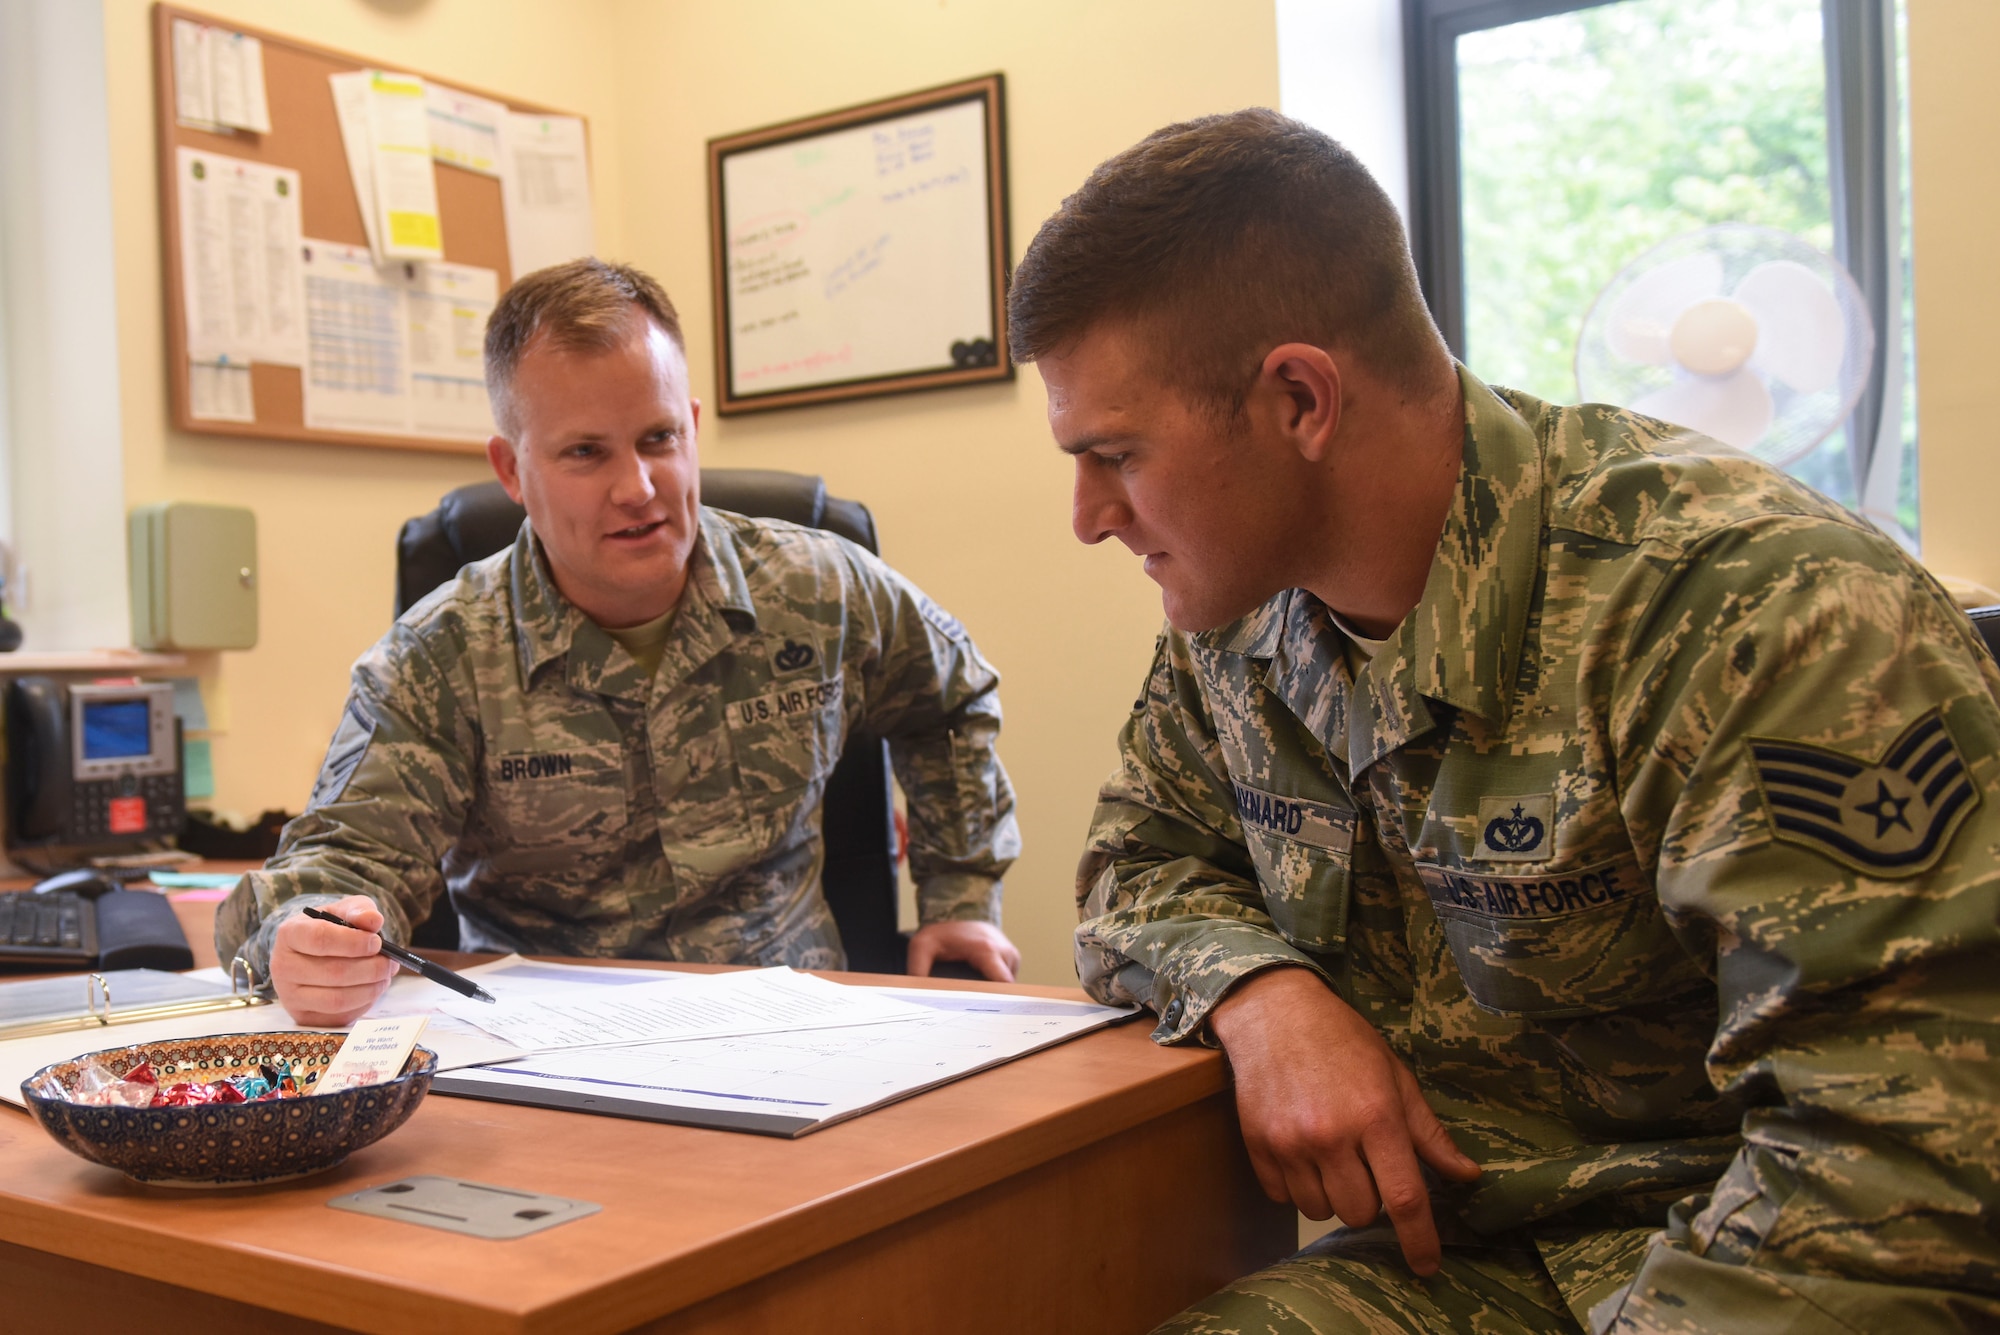 U.S. Air Force Master Sgt. Curtis L. Brown, 100th Force Support Squadron career assistance advisor, speaks with Staff Sgt. William E. Baynard, 100th Civil Engineer Squadron pavements and equipment craftsman, about career options at RAF Mildenhall, England, June 12, 2019. Brown counsels Airmen on retraining, reenlistment, separation, military benefits and commissioning opportunities. (U.S. Air Force photo by Airman 1st Class Joseph M. Barron)